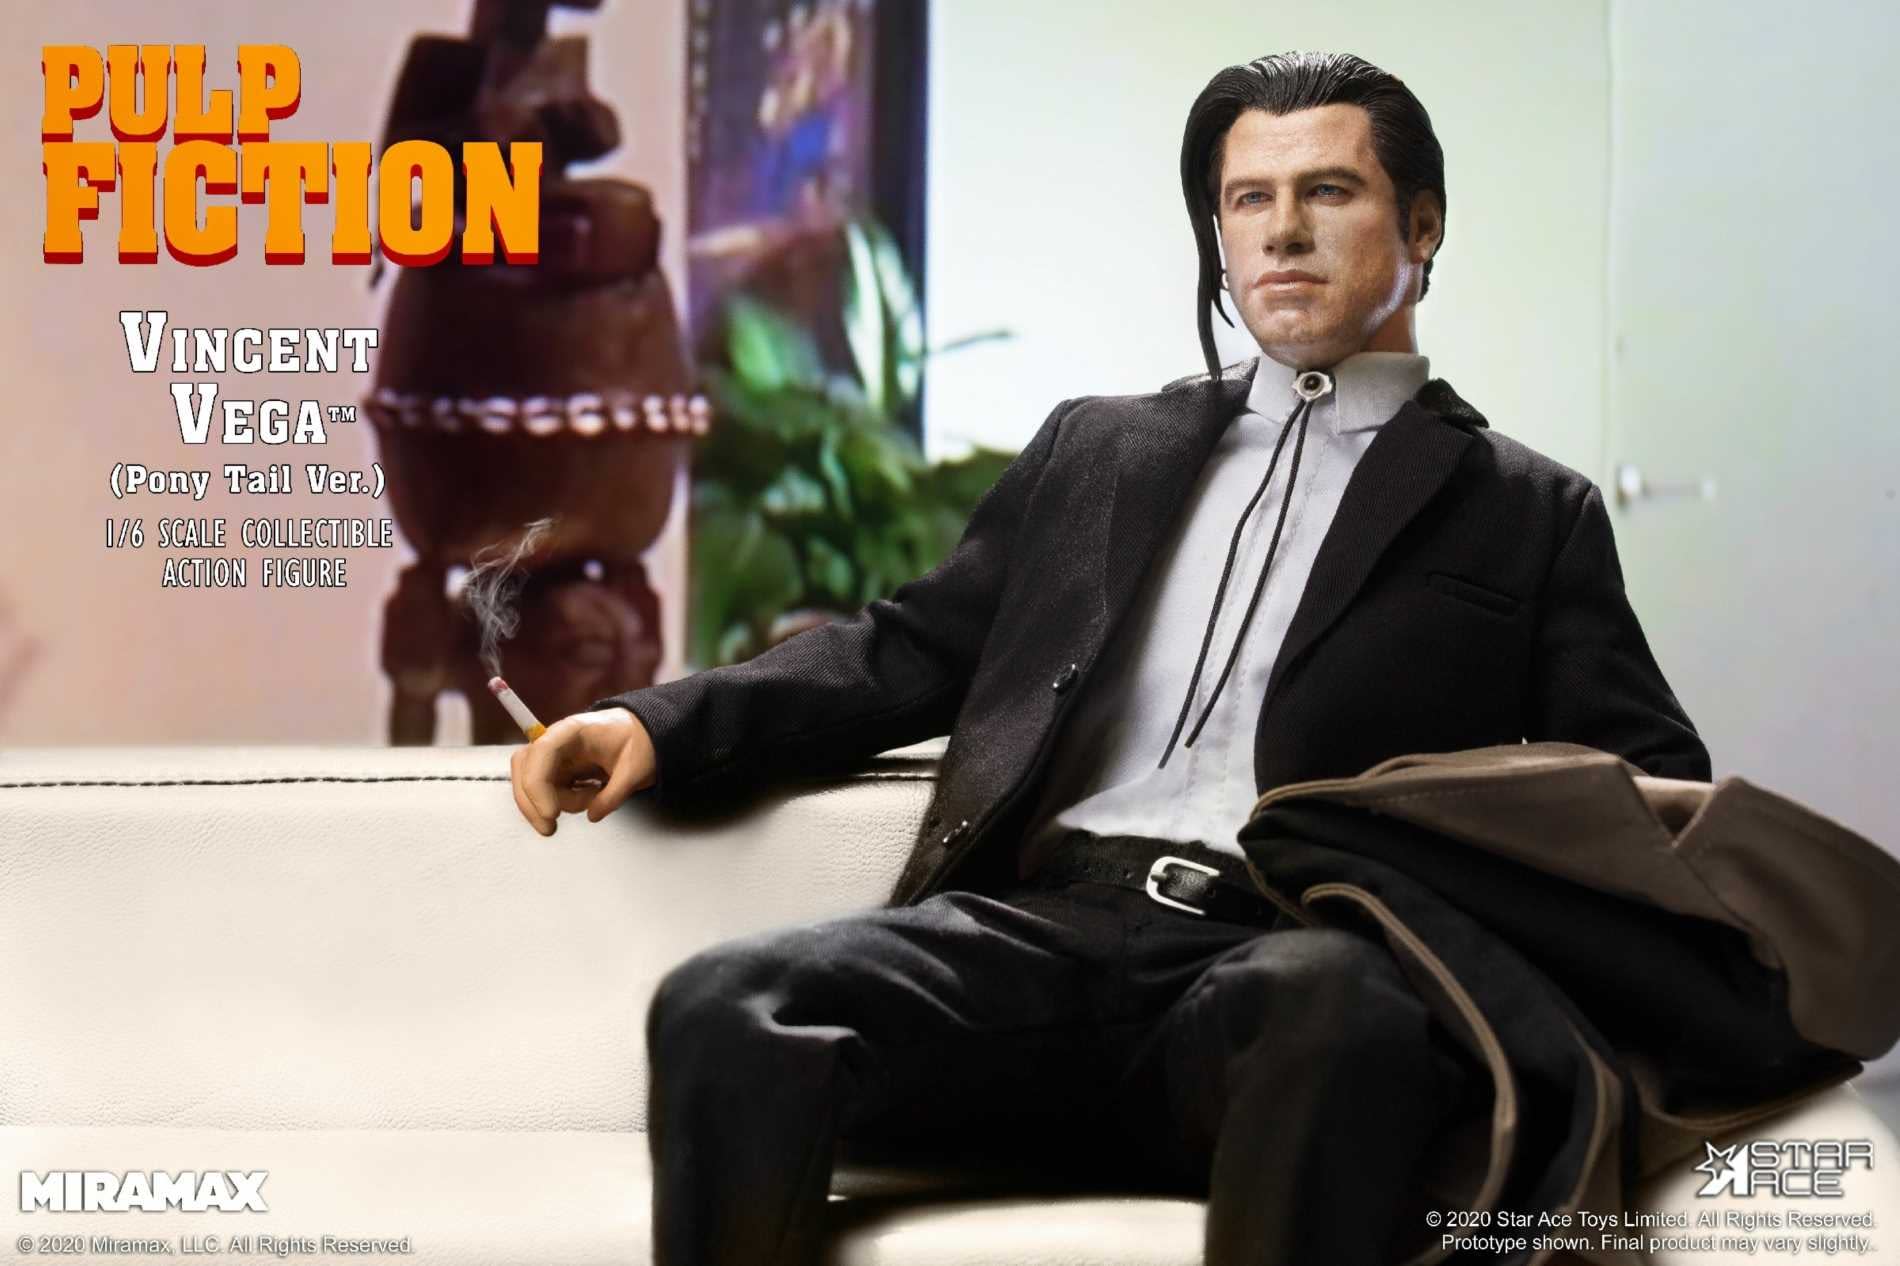 "Pulp Fiction" Come to Life with Vincent Vega Figure from Star Ace